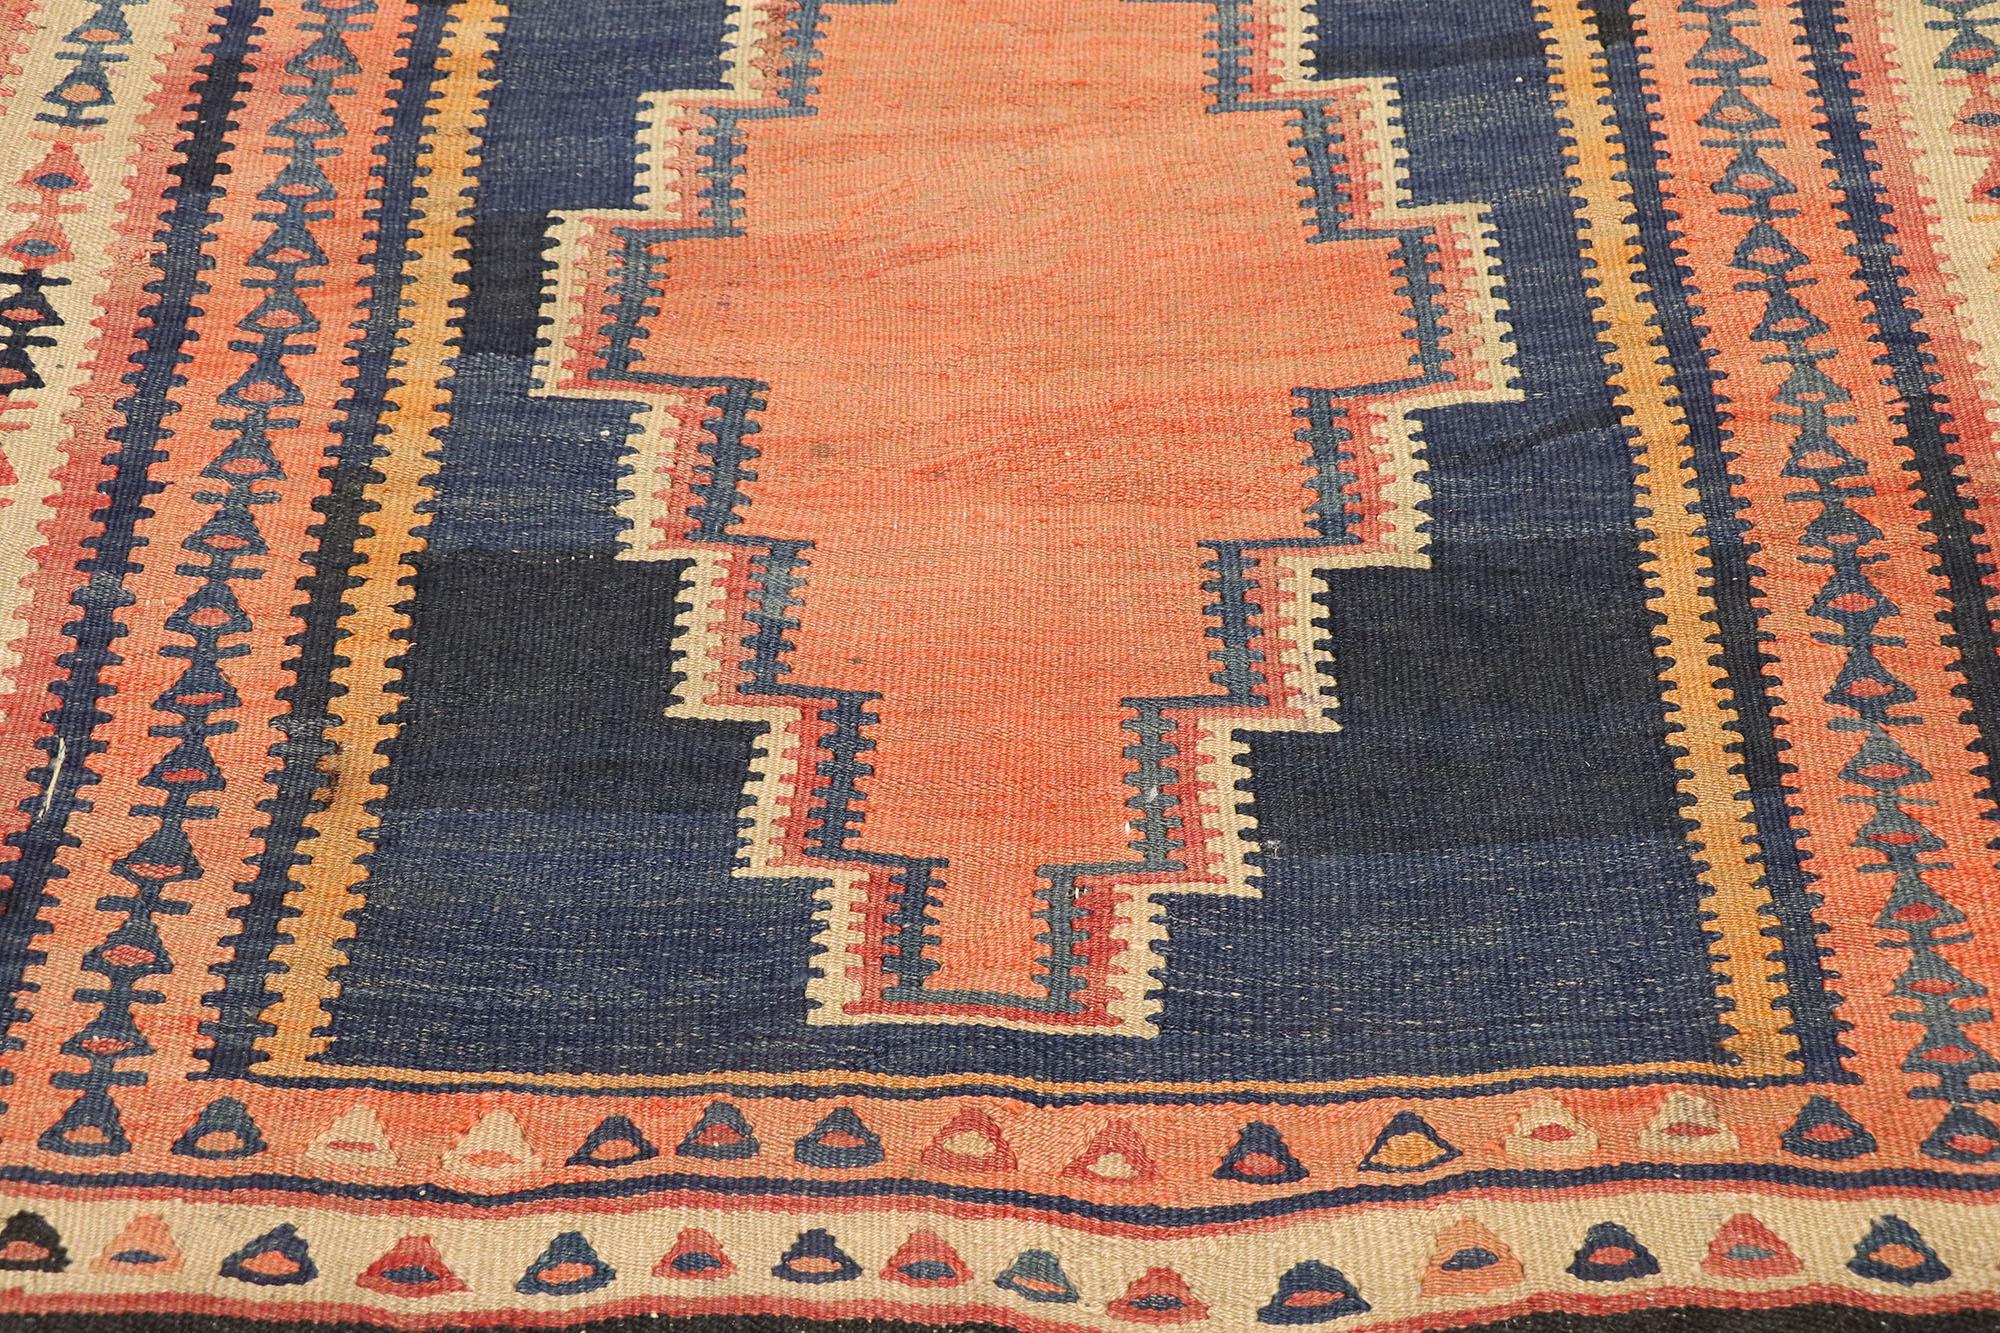 Vintage Persian Bijar Kilim Rug, Modern Desert Chic Meets Tribal Enchantment  In Good Condition For Sale In Dallas, TX